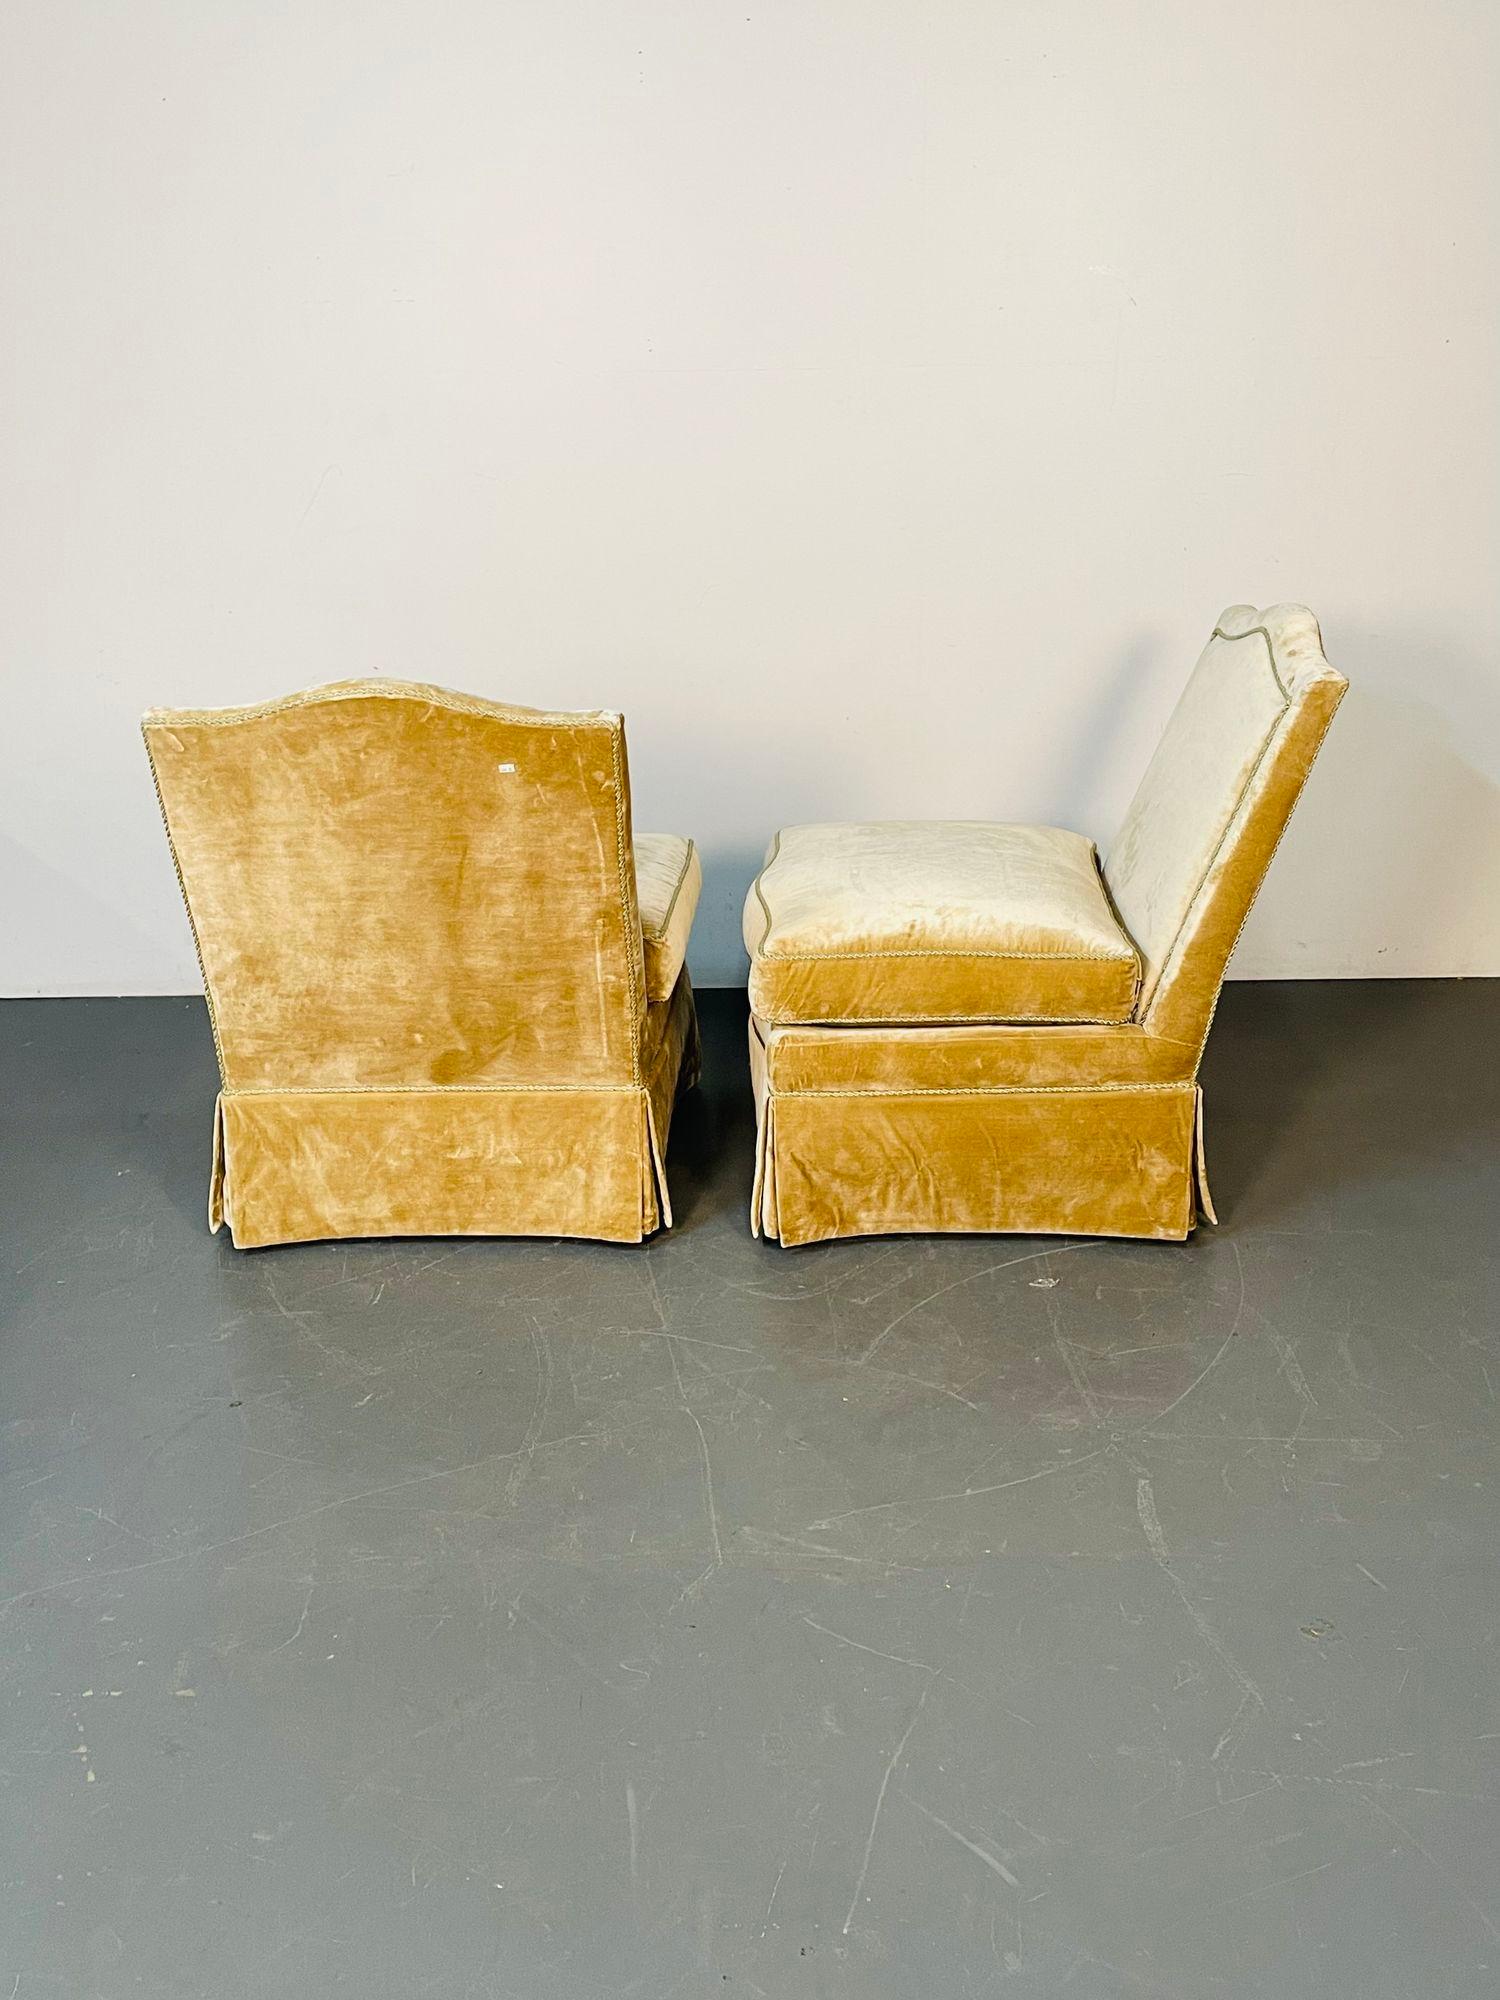 Pair of Louis XVI Style Mohair Slipper or Lounge Chairs, Traditional, Velvet In Good Condition For Sale In Stamford, CT